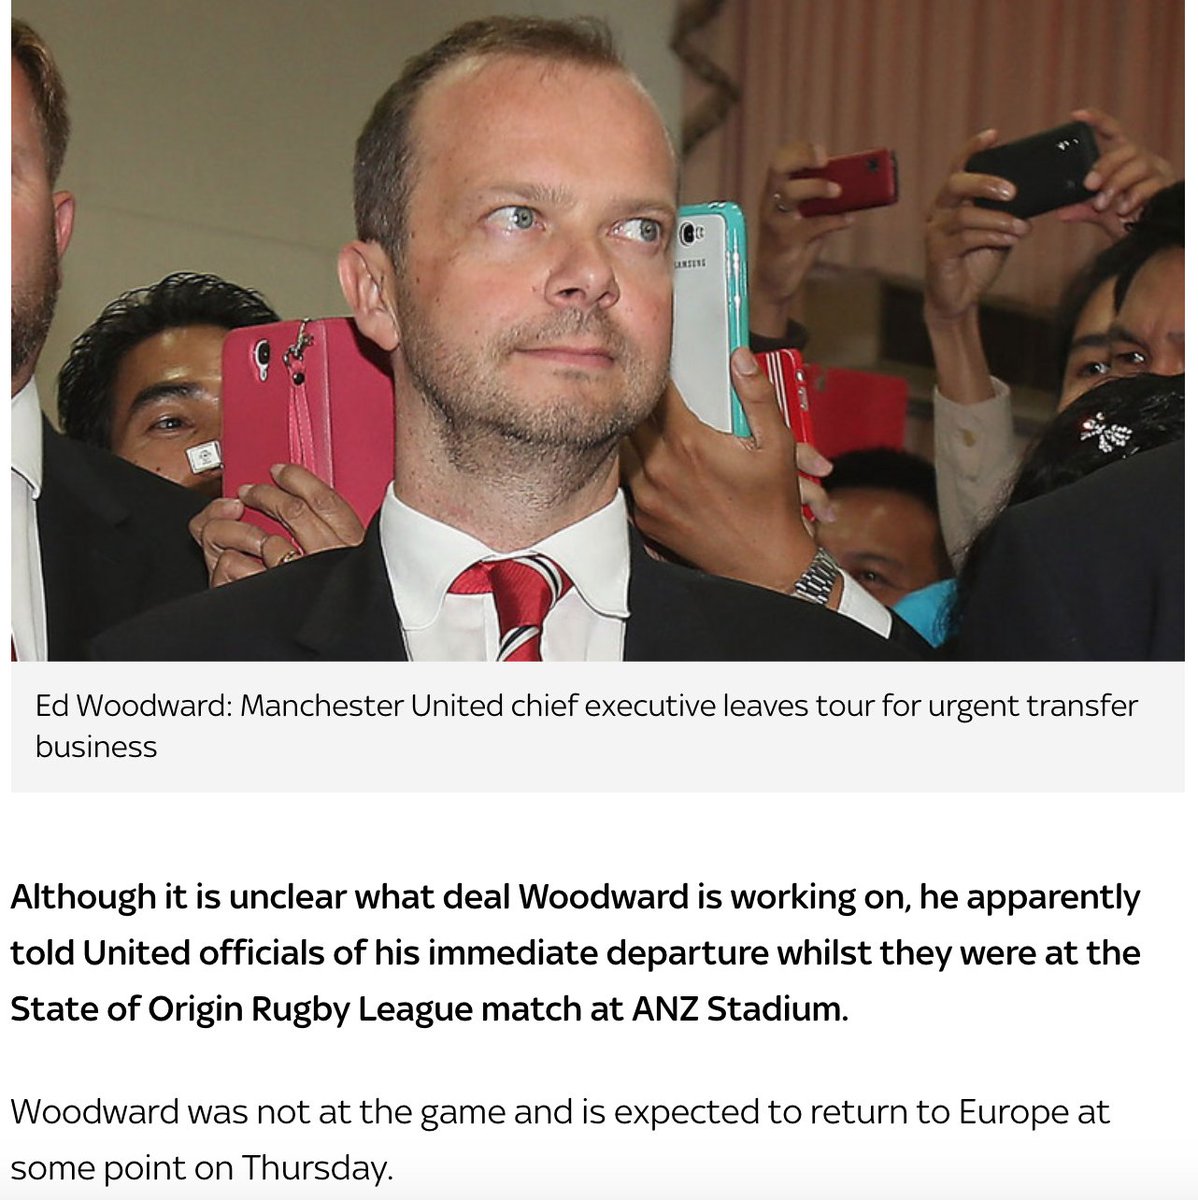 With a couple weeks of the transfer window remaining, Woodward left United's pre-season tour to attend to "urgent transfer business". We needn't have got our hopes up.